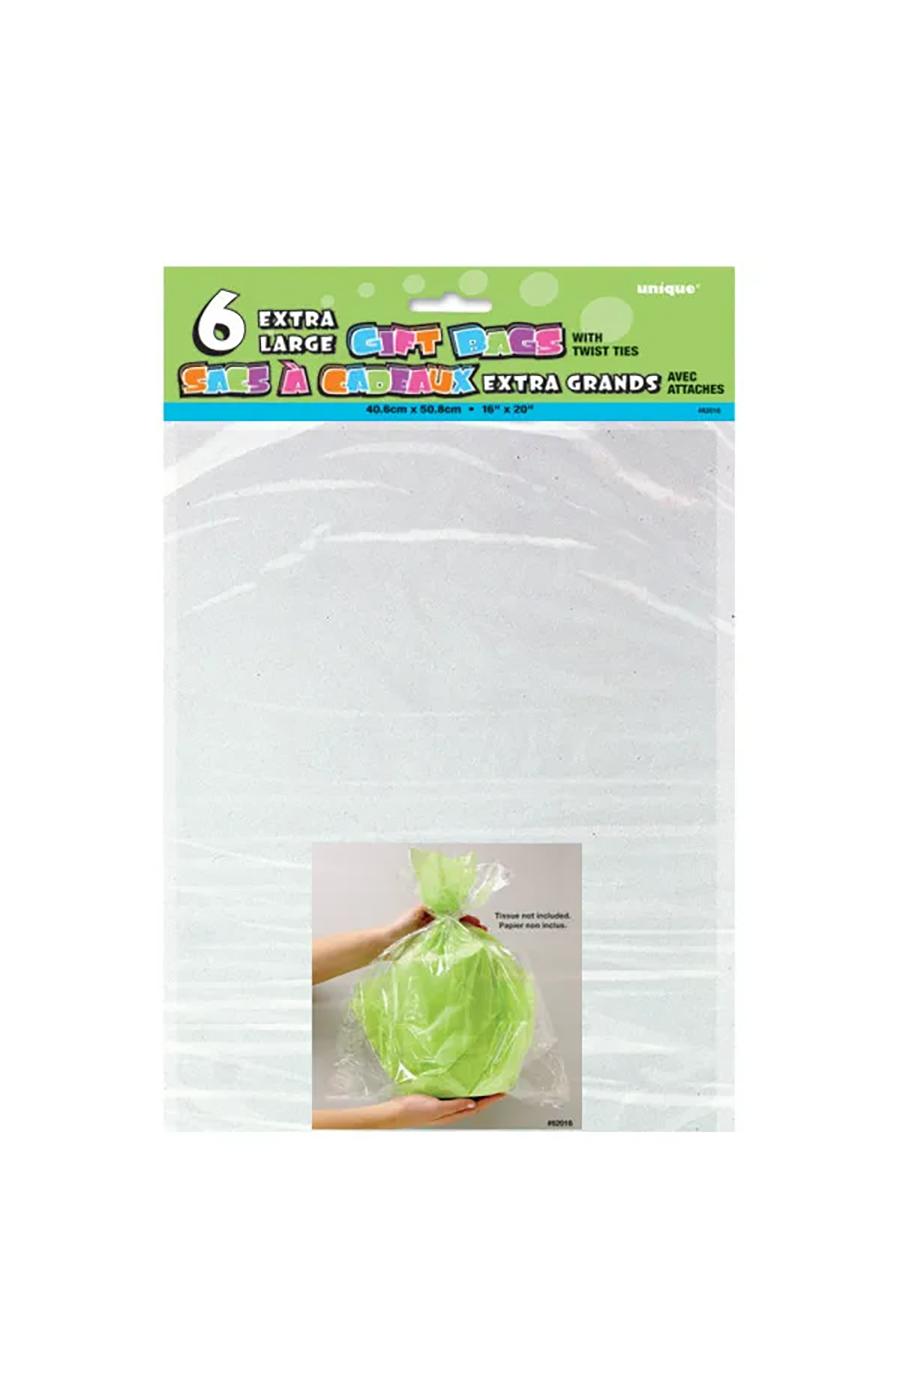 unique Extra Large Cello Gift Bags - Clear; image 1 of 2